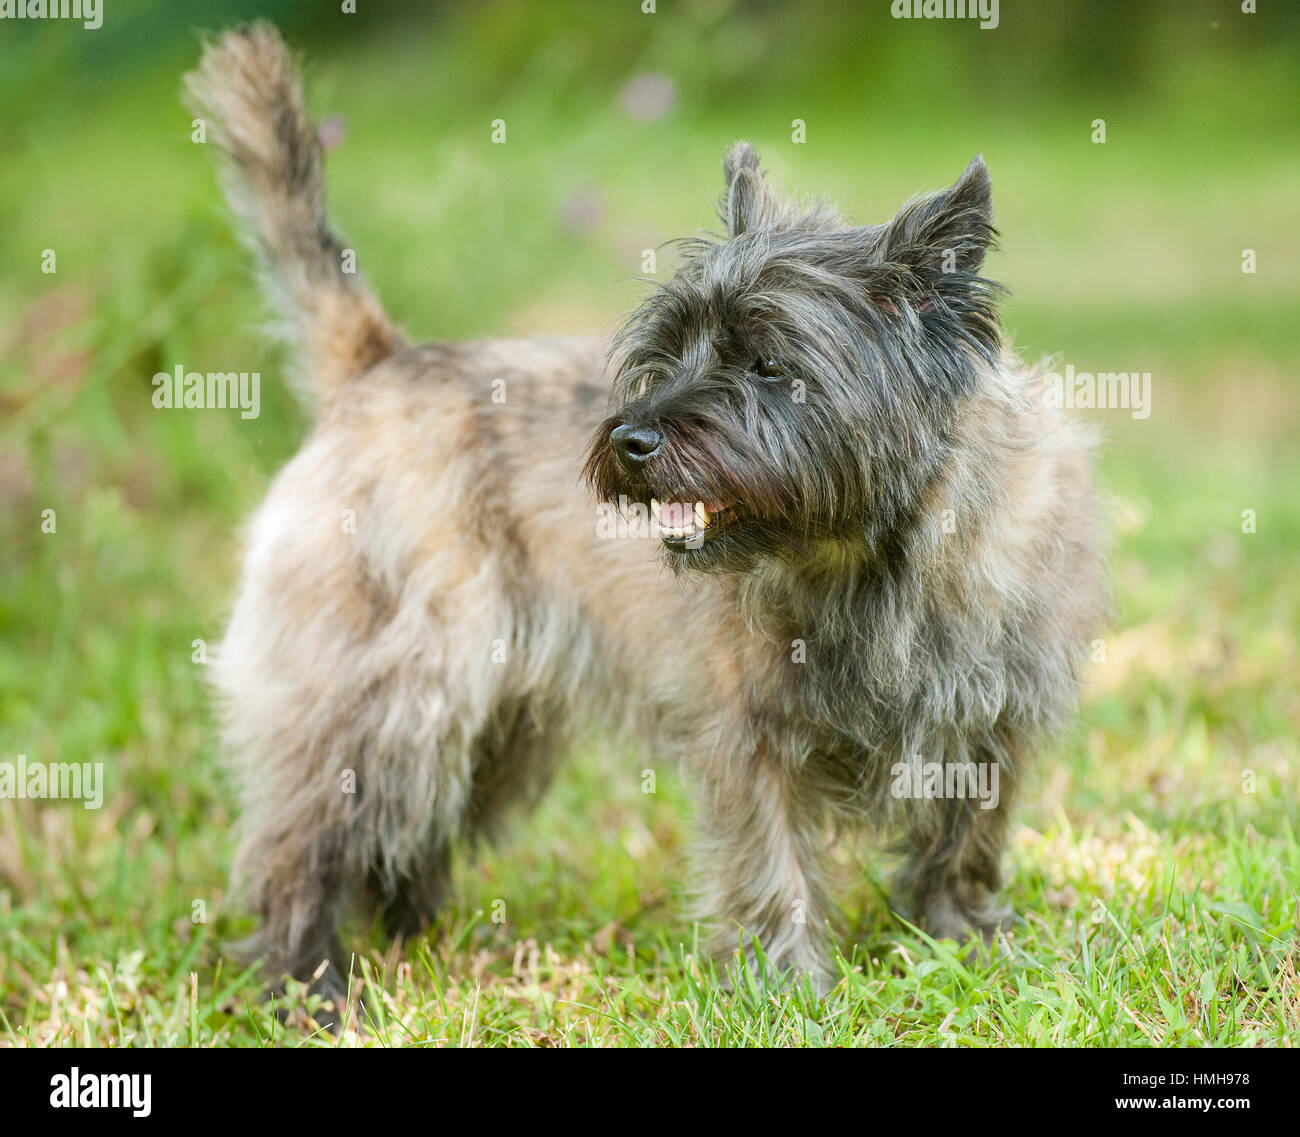 Stunning Beautiful Purebred Akc Westminster Bloodline Cairn Terrier Stock Photo Alamy